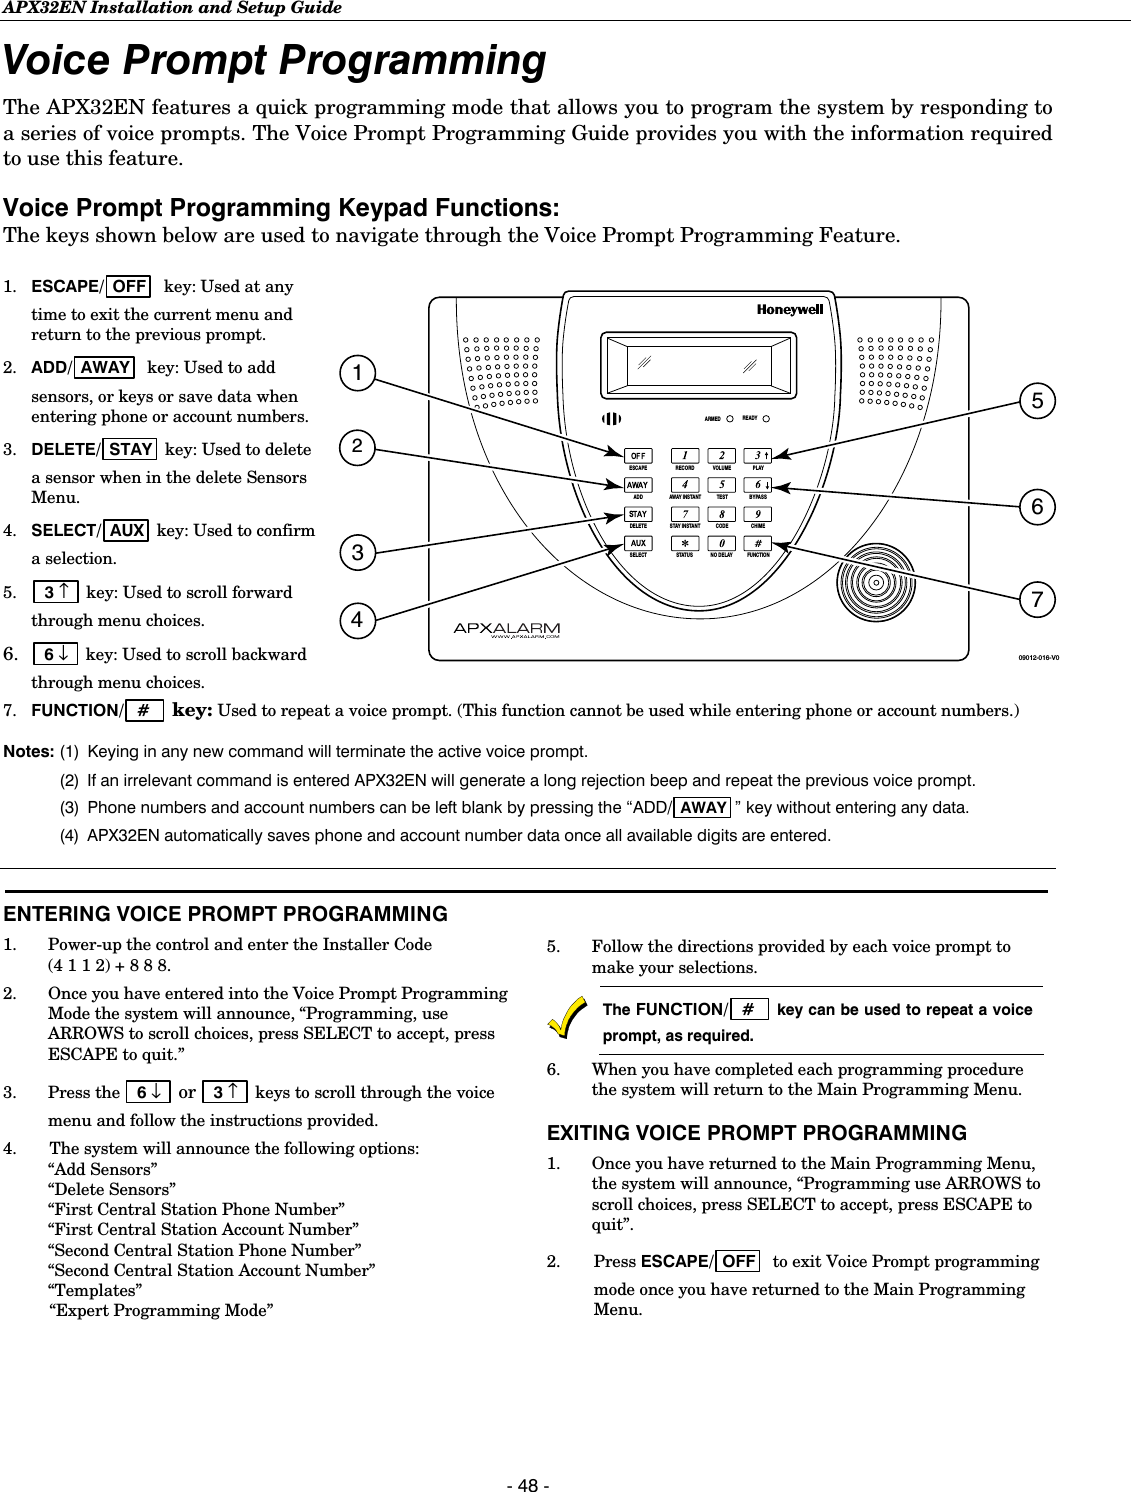 APX32EN Installation and Setup Guide  - 48 - Voice Prompt Programming  The APX32EN features a quick programming mode that allows you to program the system by responding to a series of voice prompts. The Voice Prompt Programming Guide provides you with the information required to use this feature.  Voice Prompt Programming Keypad Functions: The keys shown below are used to navigate through the Voice Prompt Programming Feature. 1.  ESCAPE/ OFF   key: Used at any time to exit the current menu and return to the previous prompt. 2.  ADD/ AWAY   key: Used to add sensors, or keys or save data when entering phone or account numbers.  3.  DELETE/ STAY  key: Used to delete a sensor when in the delete Sensors Menu.  4.  SELECT/ AUX  key: Used to confirm a selection. 5.  3 ↑   key: Used to scroll forward through menu choices. 6.  6 ↓   key: Used to scroll backward through menu choices.  BYPASSNO DELAYRECORDTESTFUNCTIONSTATUSVOLUME PLAYCODEAWAY INSTANTSTAY INSTANTESCAPESELECTADDDELETE CHIMEARMED READY09012-016-V05743126 7.  FUNCTION/  #    key: Used to repeat a voice prompt. (This function cannot be used while entering phone or account numbers.) Notes: (1)  Keying in any new command will terminate the active voice prompt.    (2)  If an irrelevant command is entered APX32EN will generate a long rejection beep and repeat the previous voice prompt.  (3) Phone numbers and account numbers can be left blank by pressing the “ADD/ AWAY ” key without entering any data.  (4)  APX32EN automatically saves phone and account number data once all available digits are entered.   ENTERING VOICE PROMPT PROGRAMMING 1.  Power-up the control and enter the Installer Code (4 1 1 2) + 8 8 8. 2.  Once you have entered into the Voice Prompt Programming Mode the system will announce, “Programming, use ARROWS to scroll choices, press SELECT to accept, press ESCAPE to quit.” 3. Press the  6 ↓   or  3 ↑   keys to scroll through the voice menu and follow the instructions provided.  4.   The system will announce the following options:  “Add Sensors”  “Delete Sensors”  “First Central Station Phone Number”  “First Central Station Account Number”  “Second Central Station Phone Number”  “Second Central Station Account Number”  “Templates”  “Expert Programming Mode”   5.  Follow the directions provided by each voice prompt to make your selections.  The FUNCTION/  #    key can be used to repeat a voice prompt, as required. 6.  When you have completed each programming procedure the system will return to the Main Programming Menu. EXITING VOICE PROMPT PROGRAMMING 1.  Once you have returned to the Main Programming Menu, the system will announce, “Programming use ARROWS to scroll choices, press SELECT to accept, press ESCAPE to quit”. 2. Press ESCAPE/ OFF   to exit Voice Prompt programming mode once you have returned to the Main Programming Menu.   